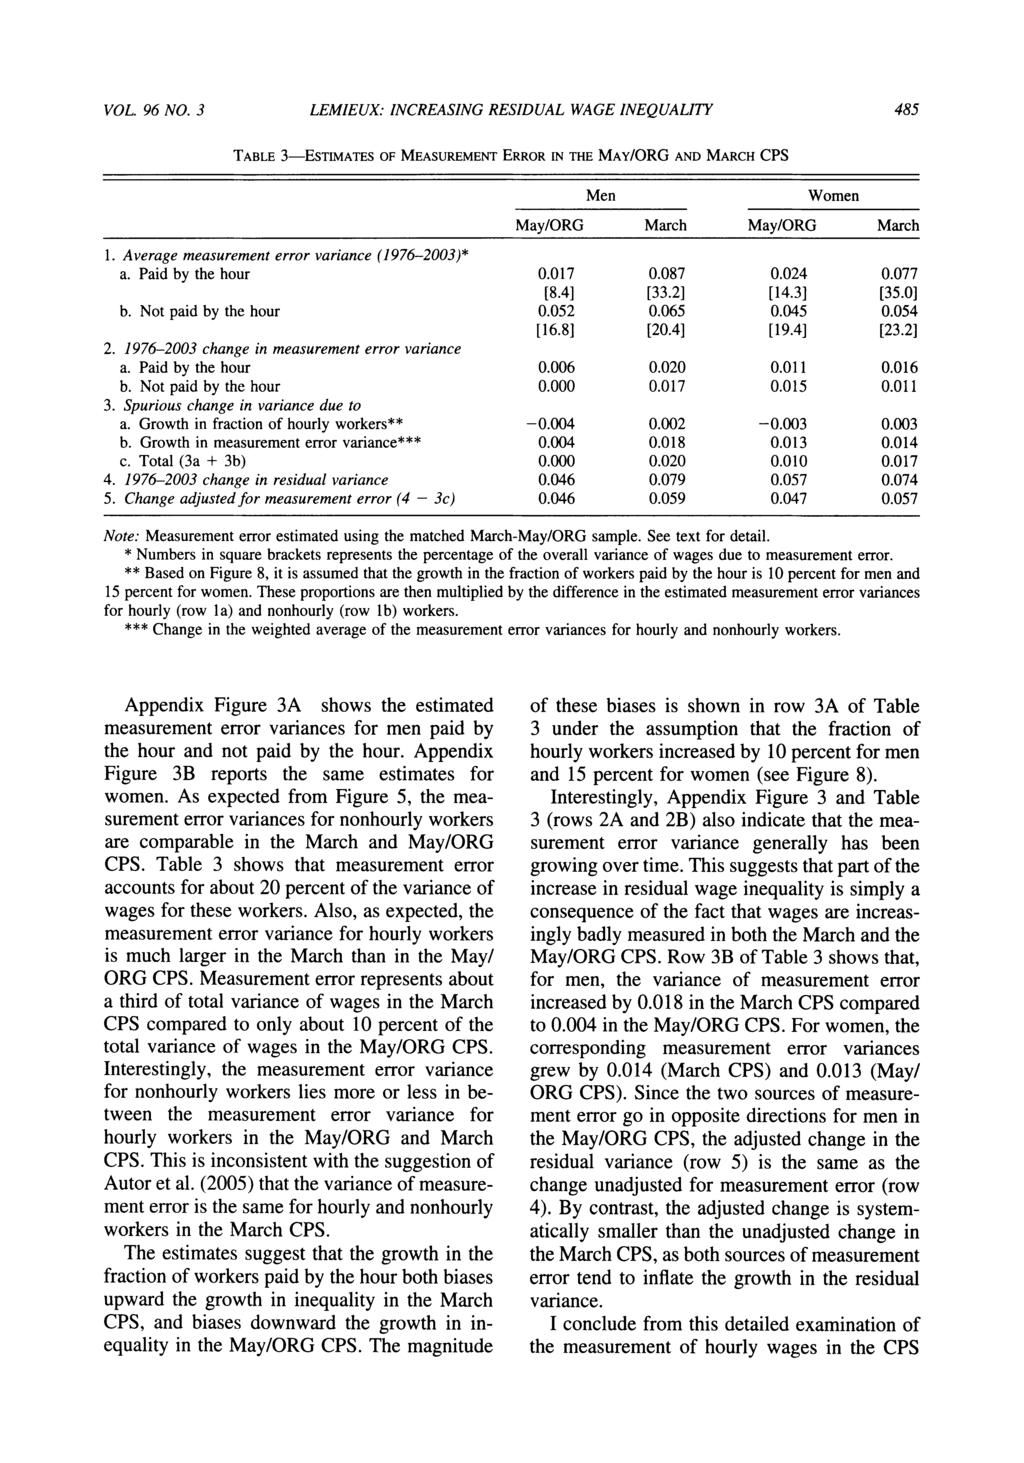 VOL. 96 NO. 3 LEMIEUX: INCREASING RESIDUAL WAGE INEQUALITY 485 TABLE 3--ESTIMATES OF MEASUREMENT ERROR IN THE MAY/ORG AND MARCH CPS Men Women May/ORG March May/ORG March.